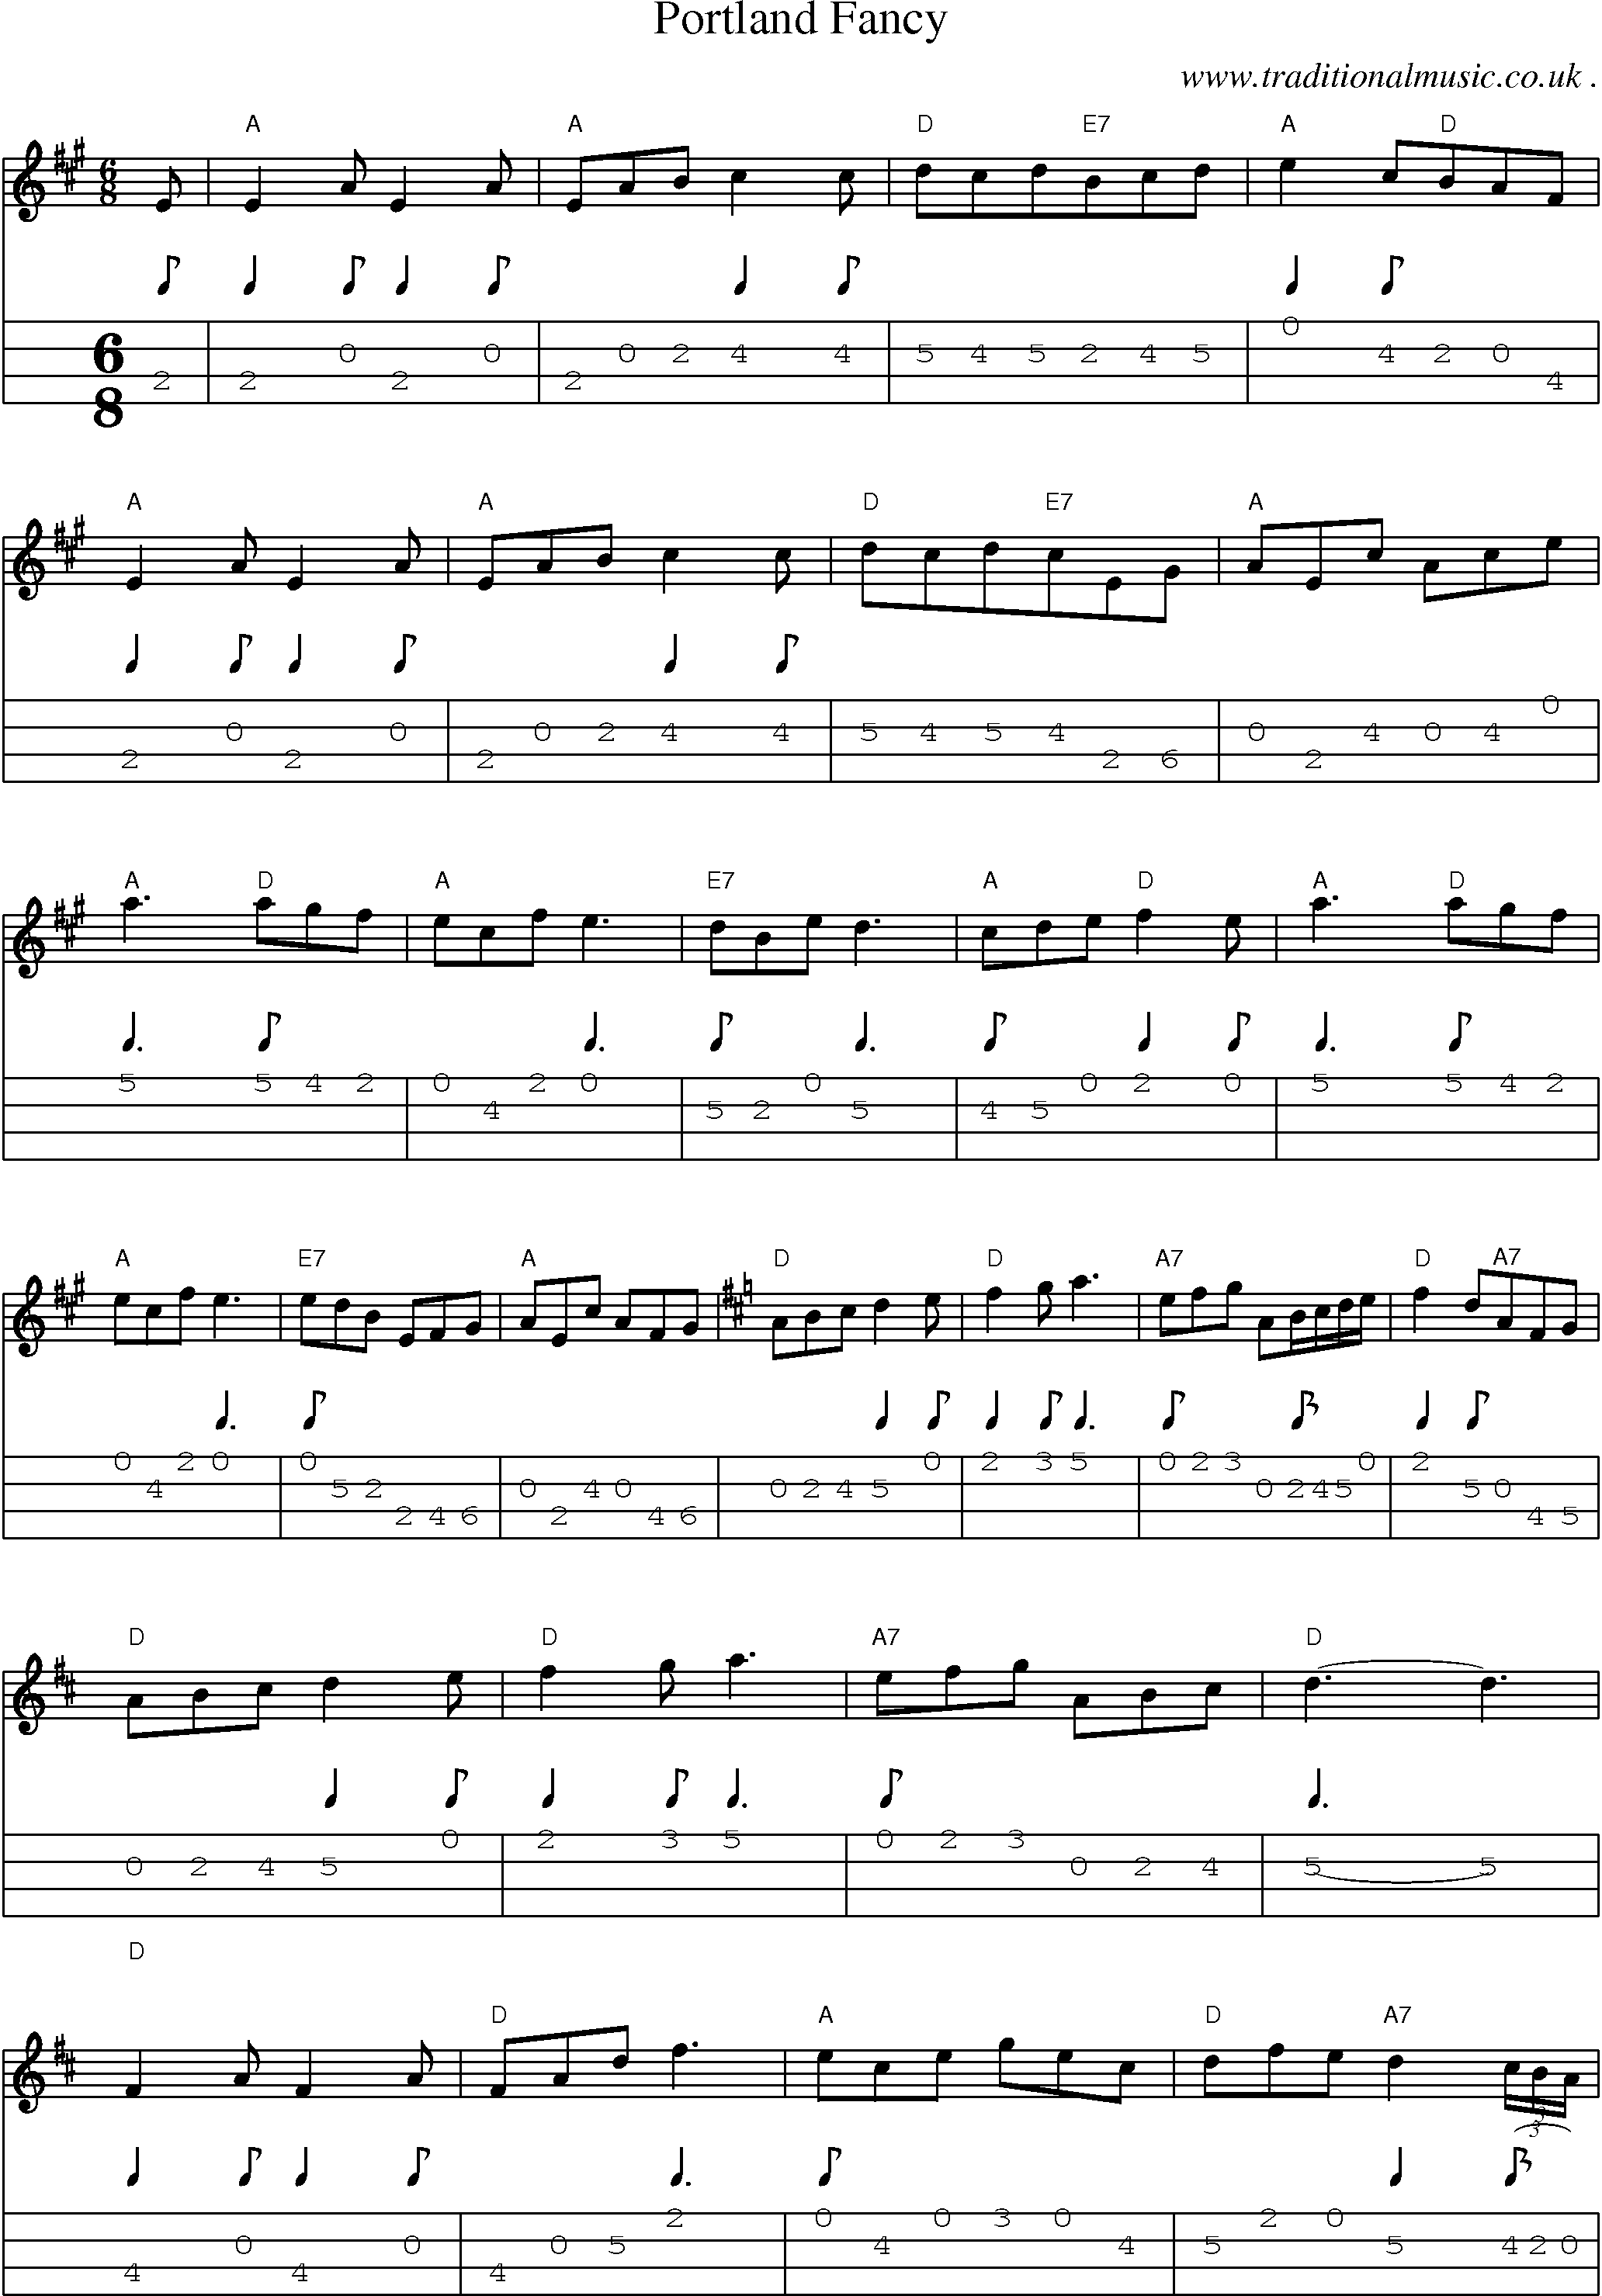 Sheet-Music and Mandolin Tabs for Portland Fancy